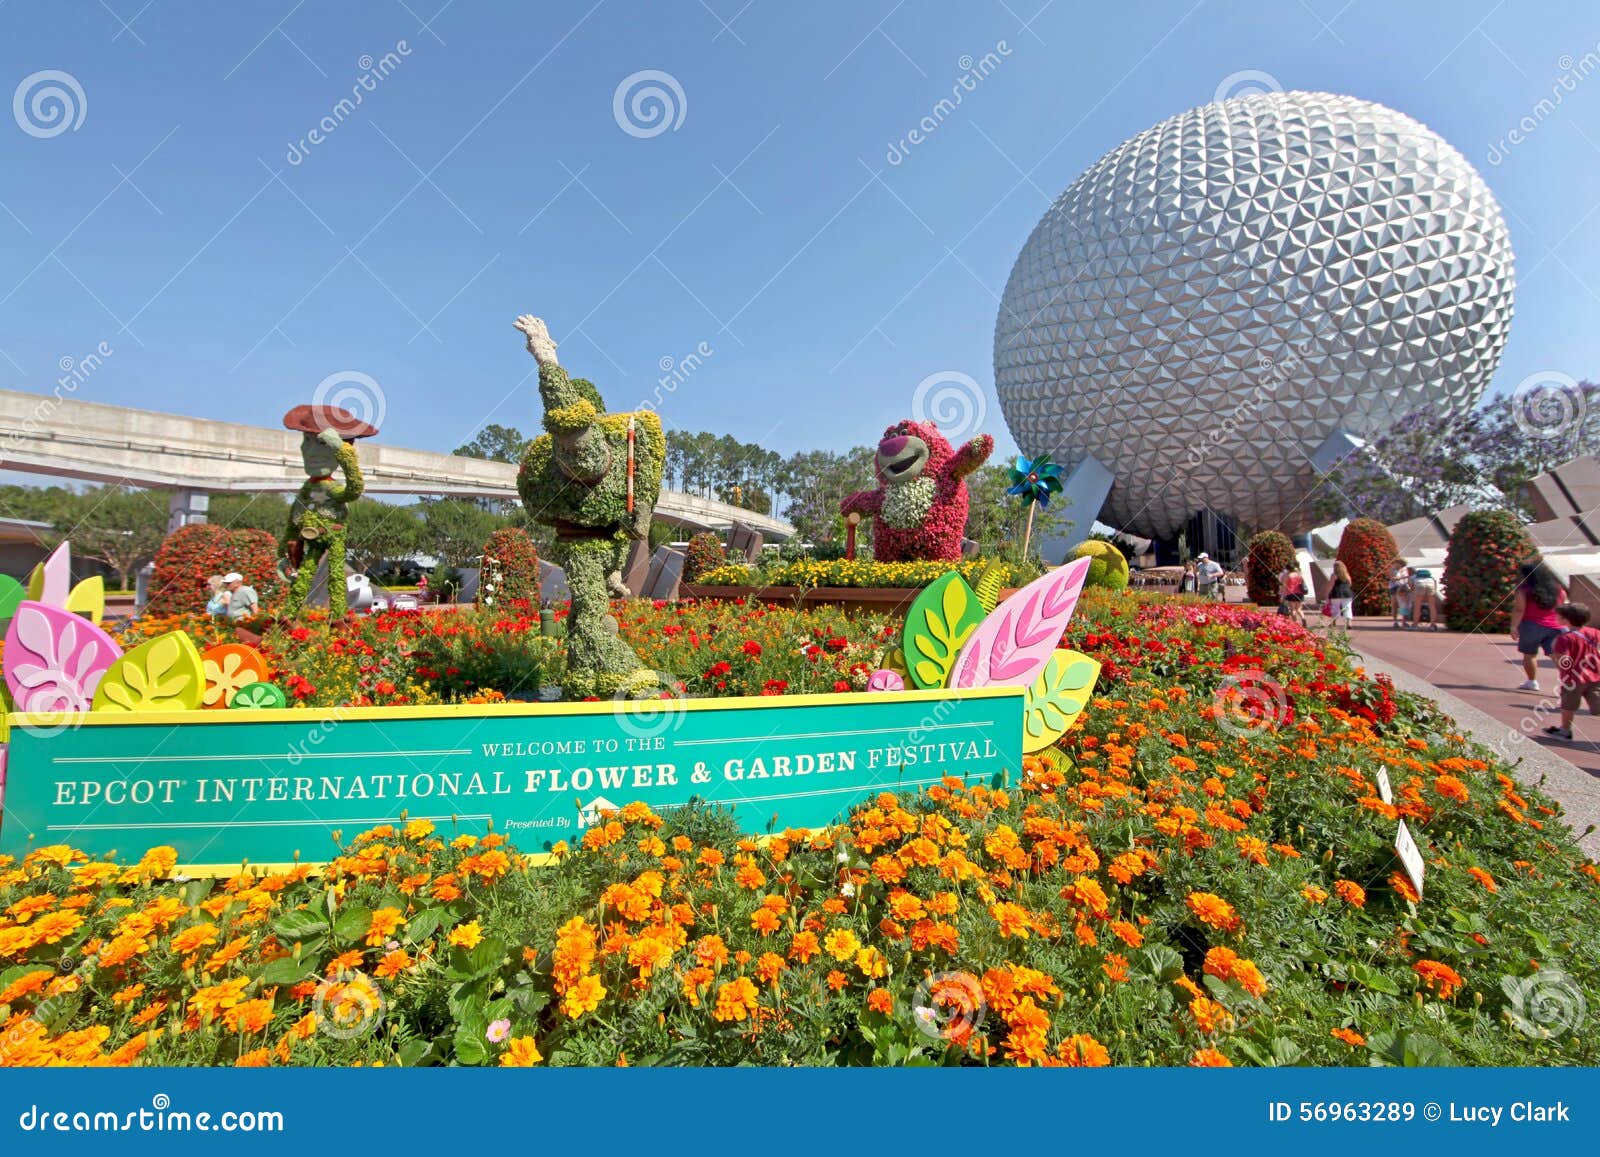 epcot flower and garden festival editorial stock image - image of